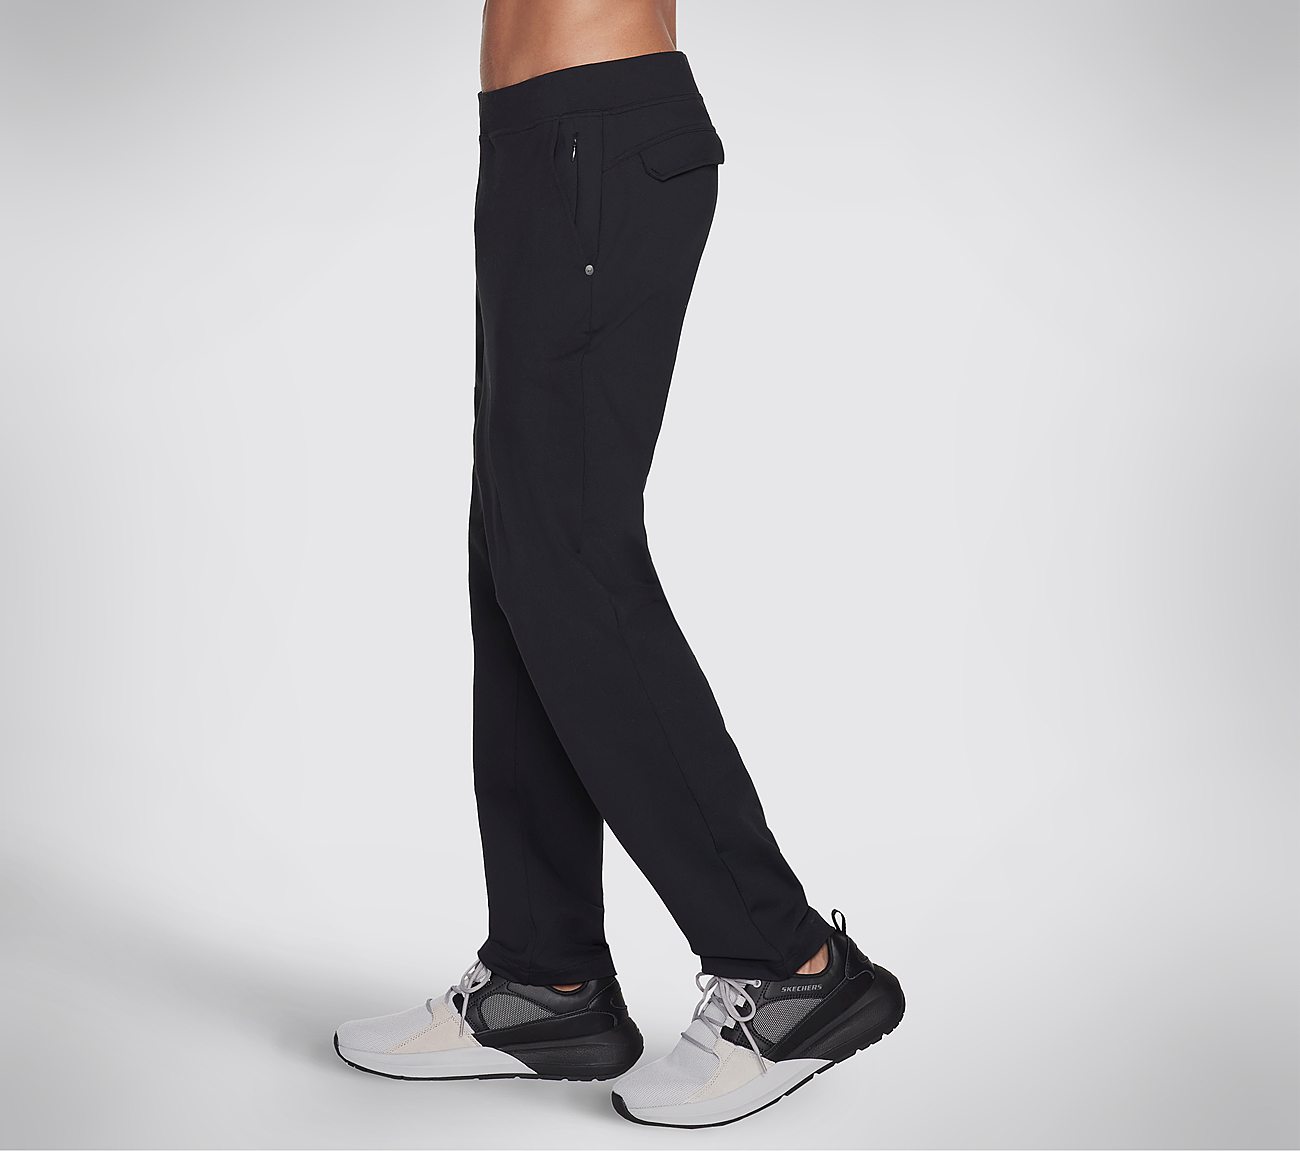 THE GOWALK PANT RECHARGE, BBBBLACK Apparel Bottom View